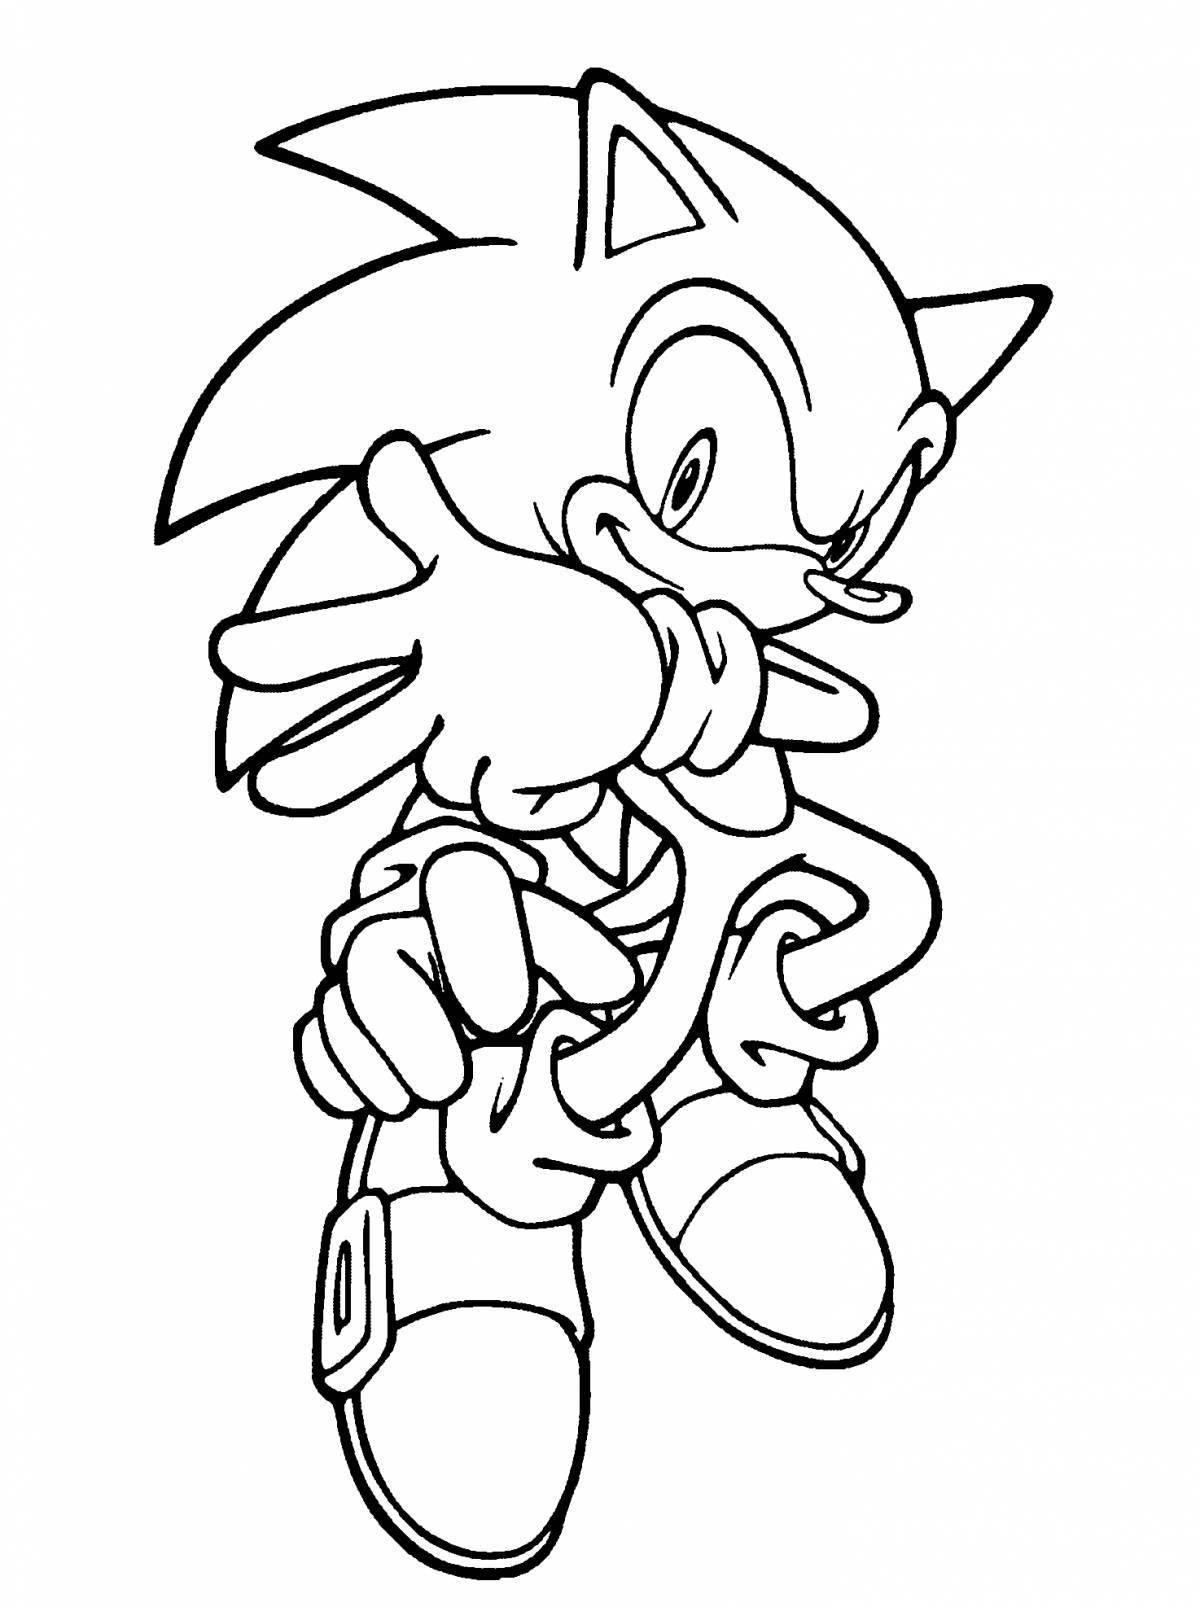 Colorful sonic coloring for boys